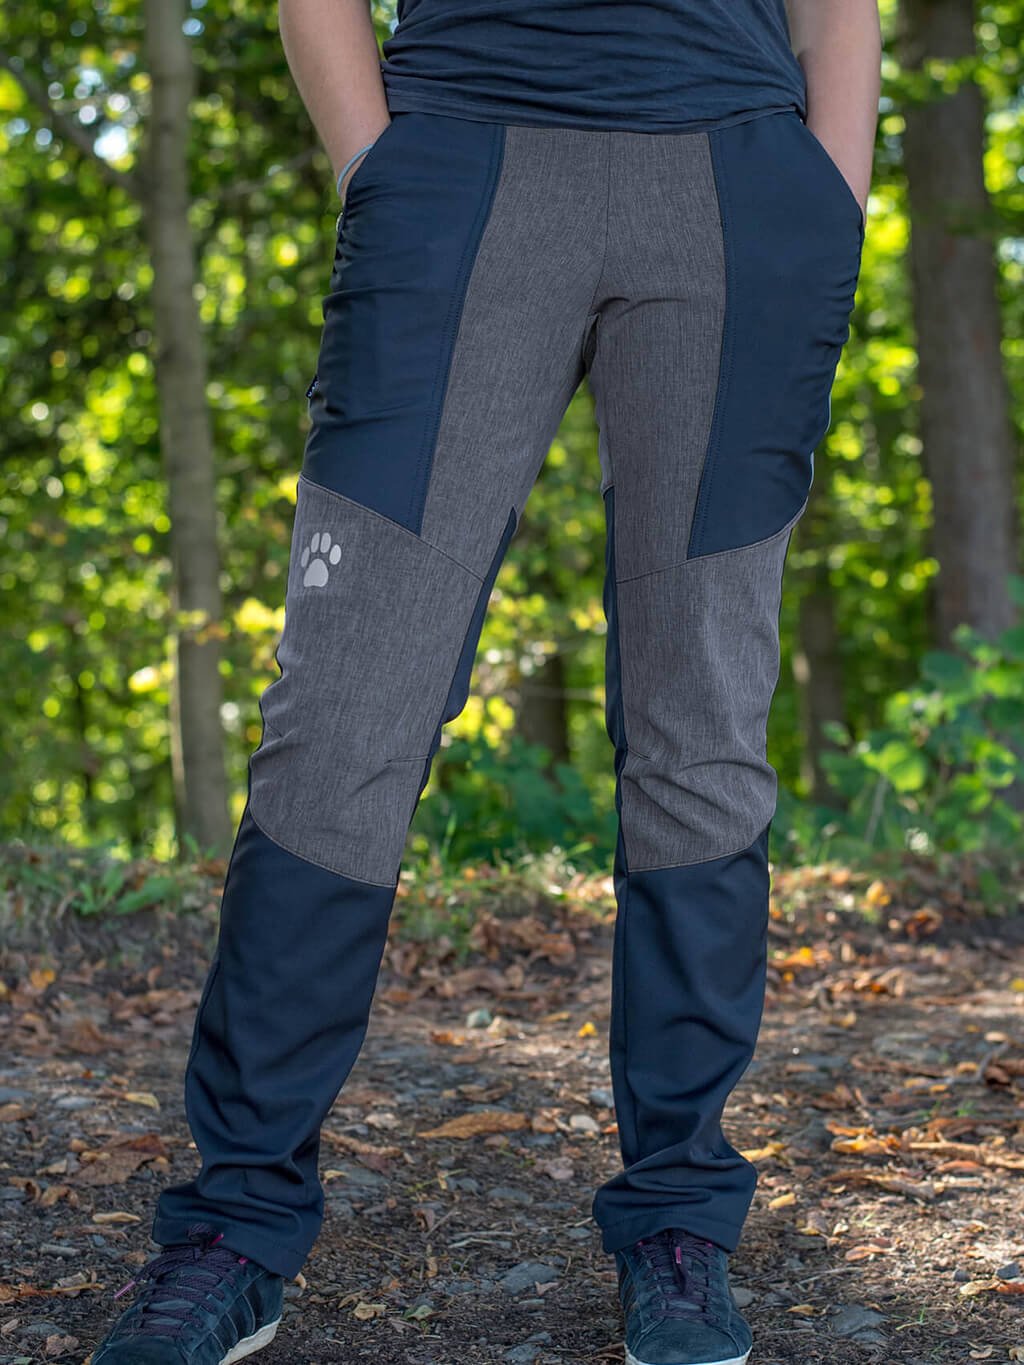 Women's training trousers WINTER striped anthracite